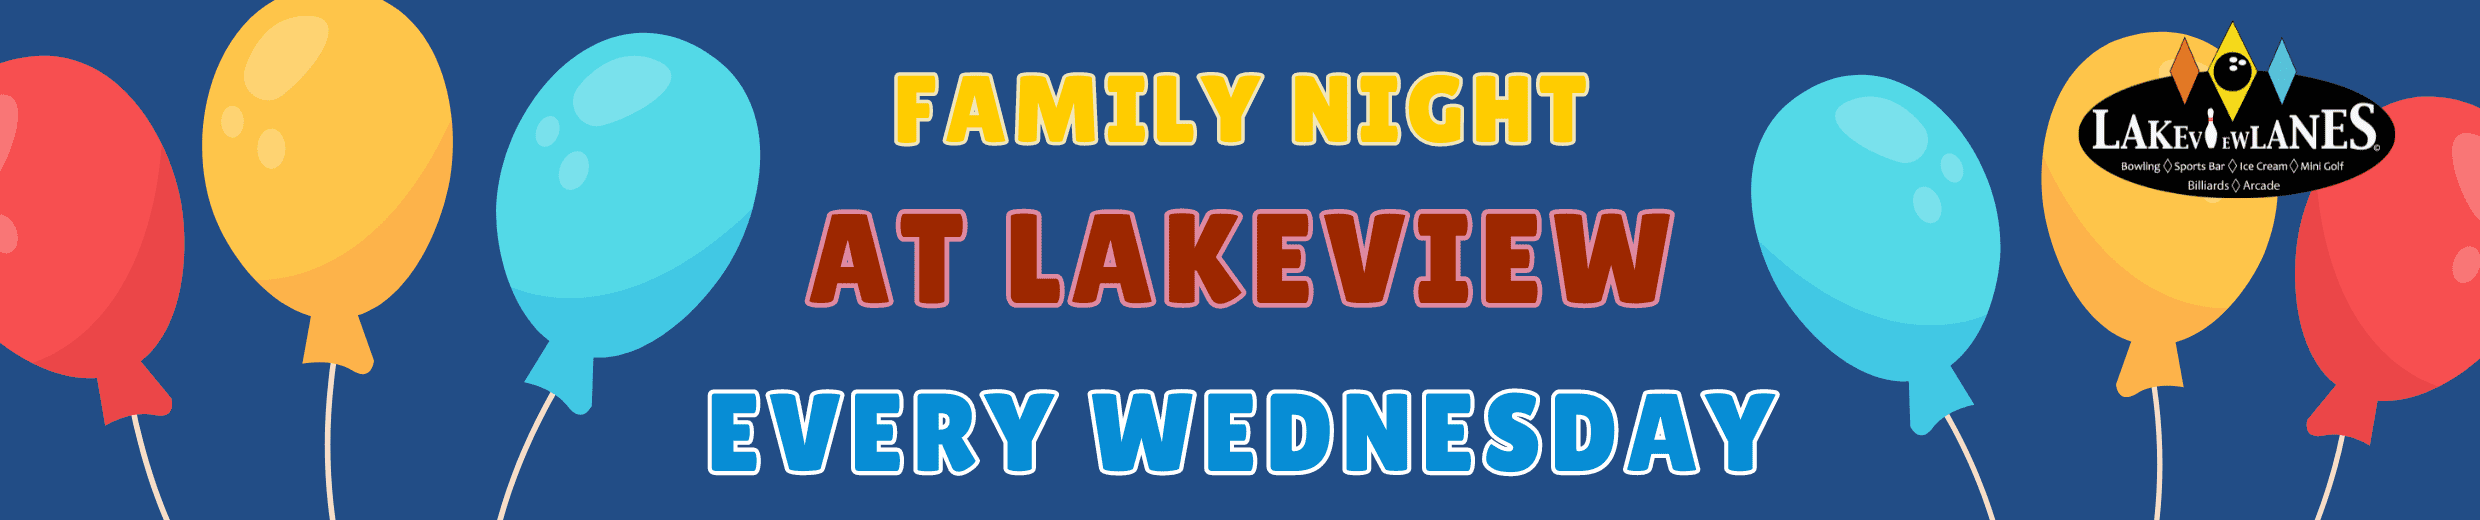 Lakeview Lanes Family Night Every Wednesday